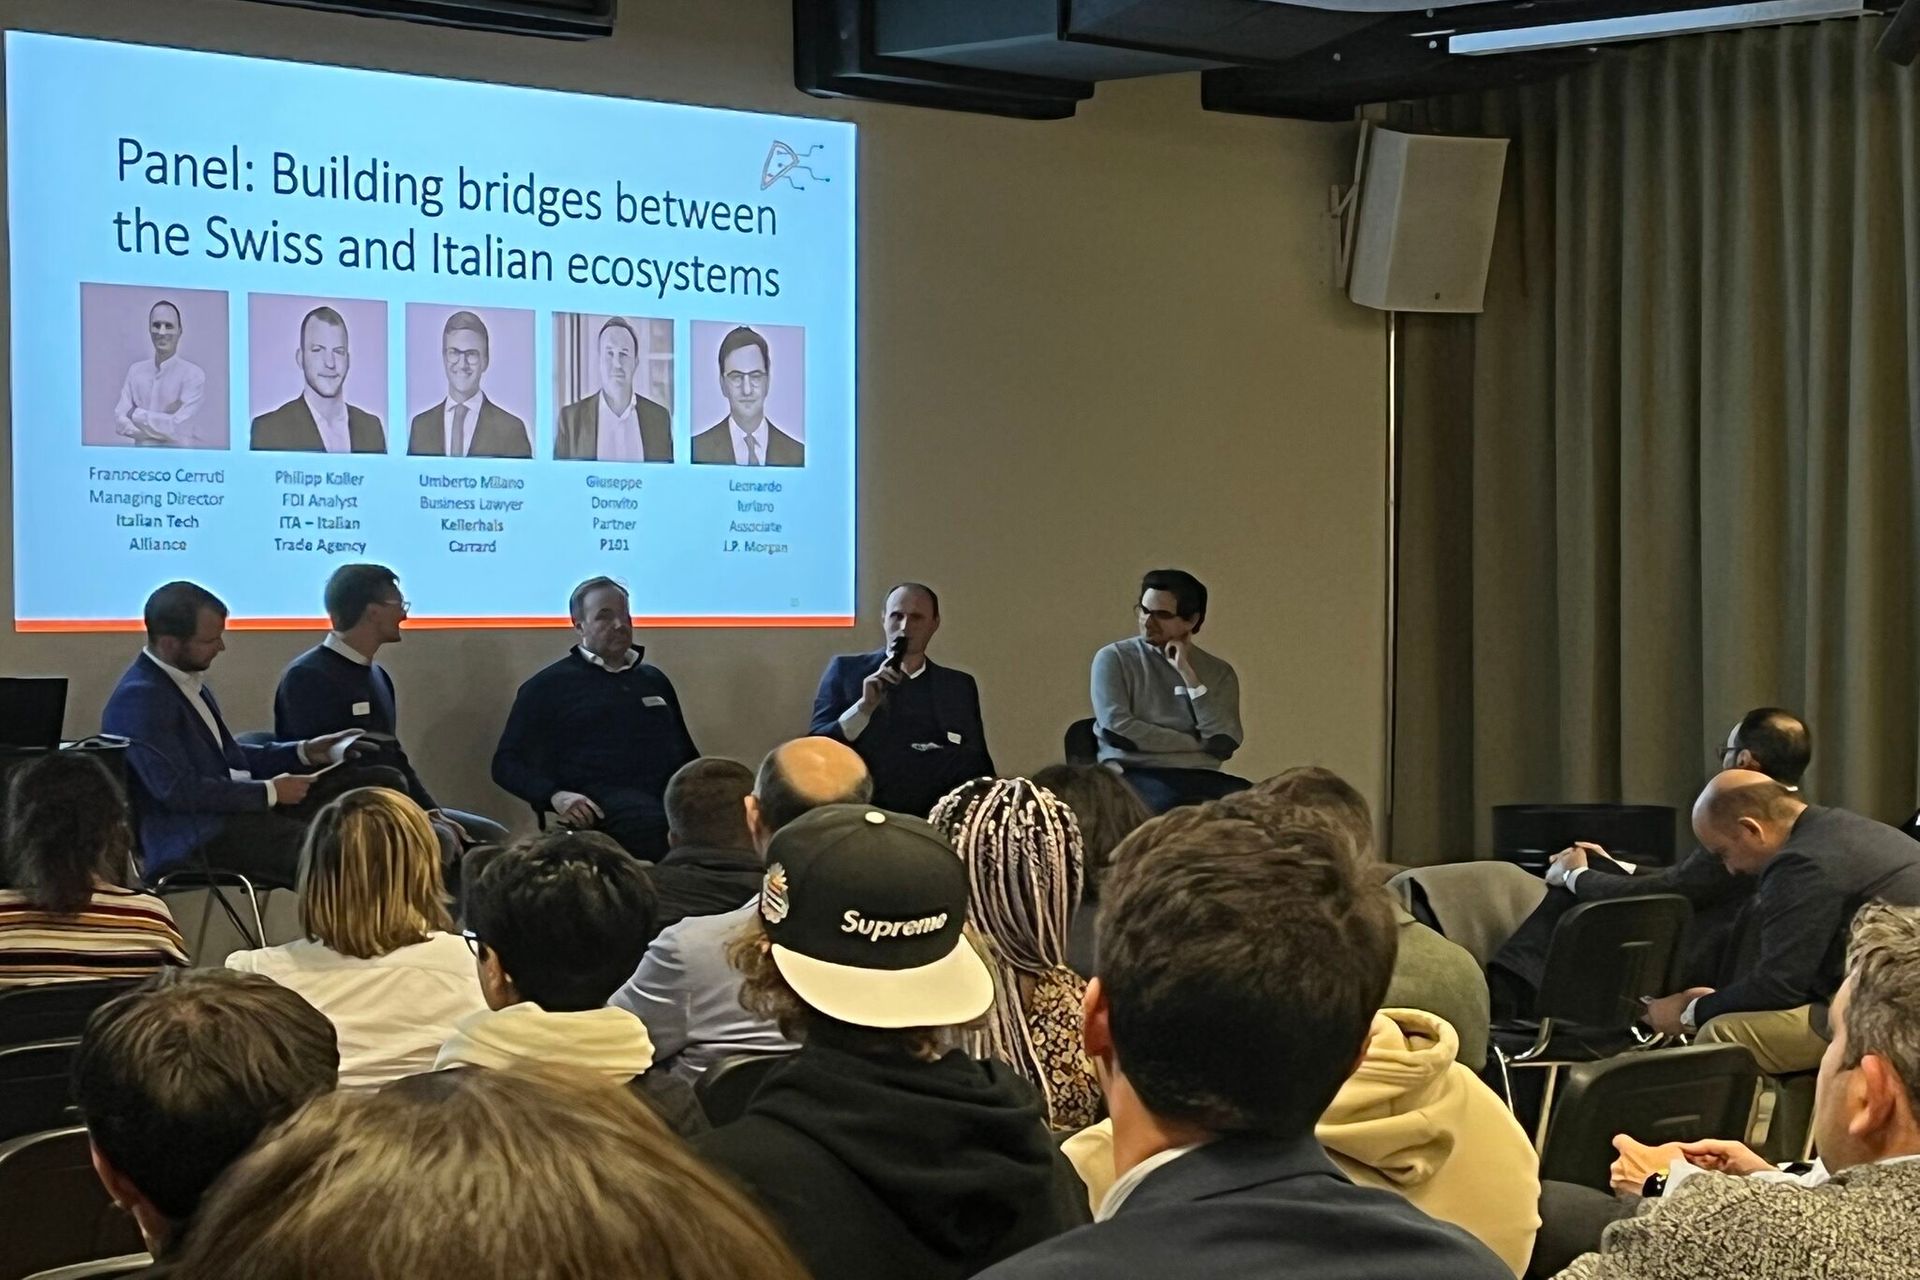 The first edition of the "Italian Tech Night", organized by the #pizzatech association, took place on the evening of 24 March 2022 at the Startup Space by IFJ in Schlieren, near Zurich: the participants in the panel "Building bridges between Swiss and Italian ecosystems , i.e. Francesco Cerruti (Italian Tech Alliance), Philipp Koller (ITA-Italian Trade Agency), Umberto Milano (Kellerhals Carrard), Giuseppe Donvito (P101) and Leonardo Iurlaro (JP Morgan)